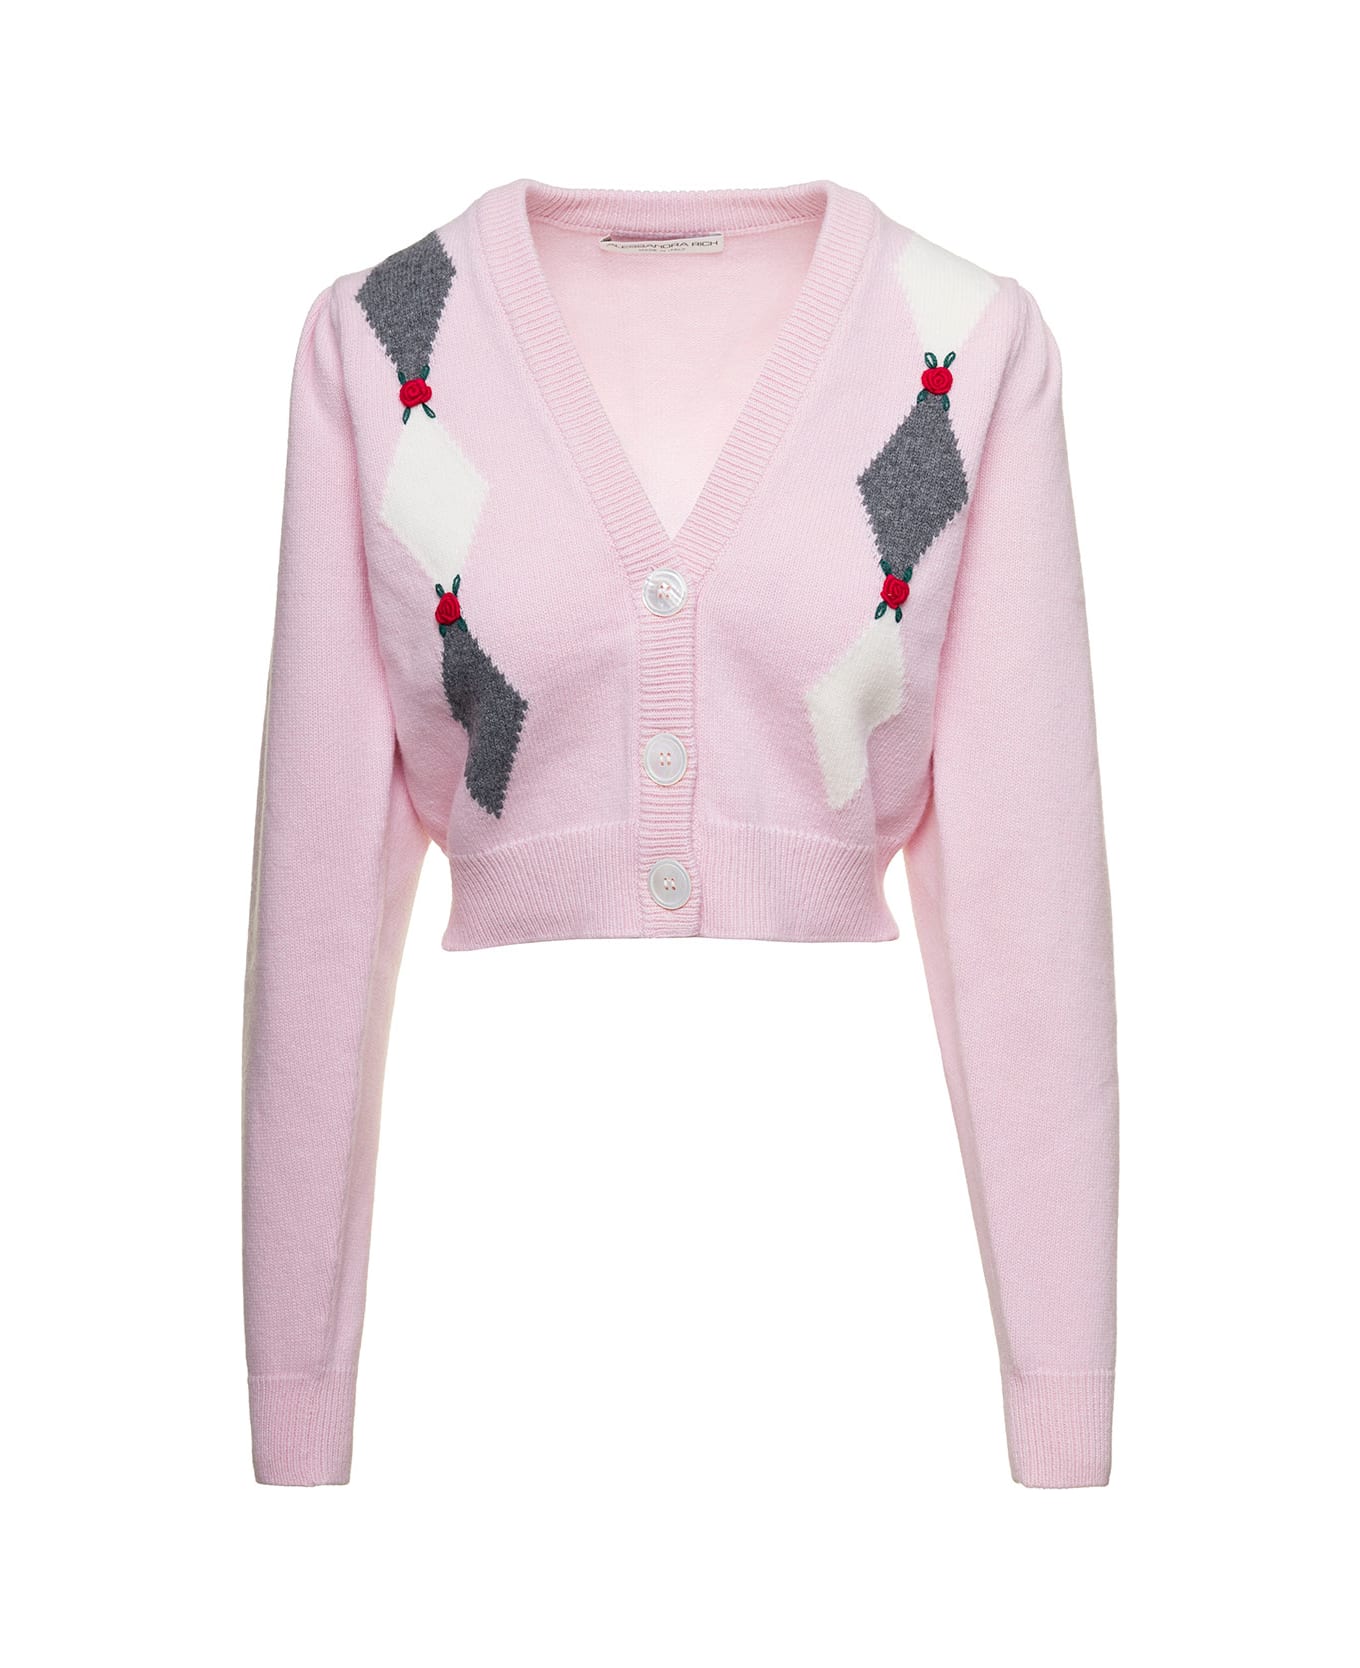 Alessandra Rich Pink Cardigan With 'diamond' Motif And Embroidered Rose Detail In Wool Woman - Pink ニットウェア